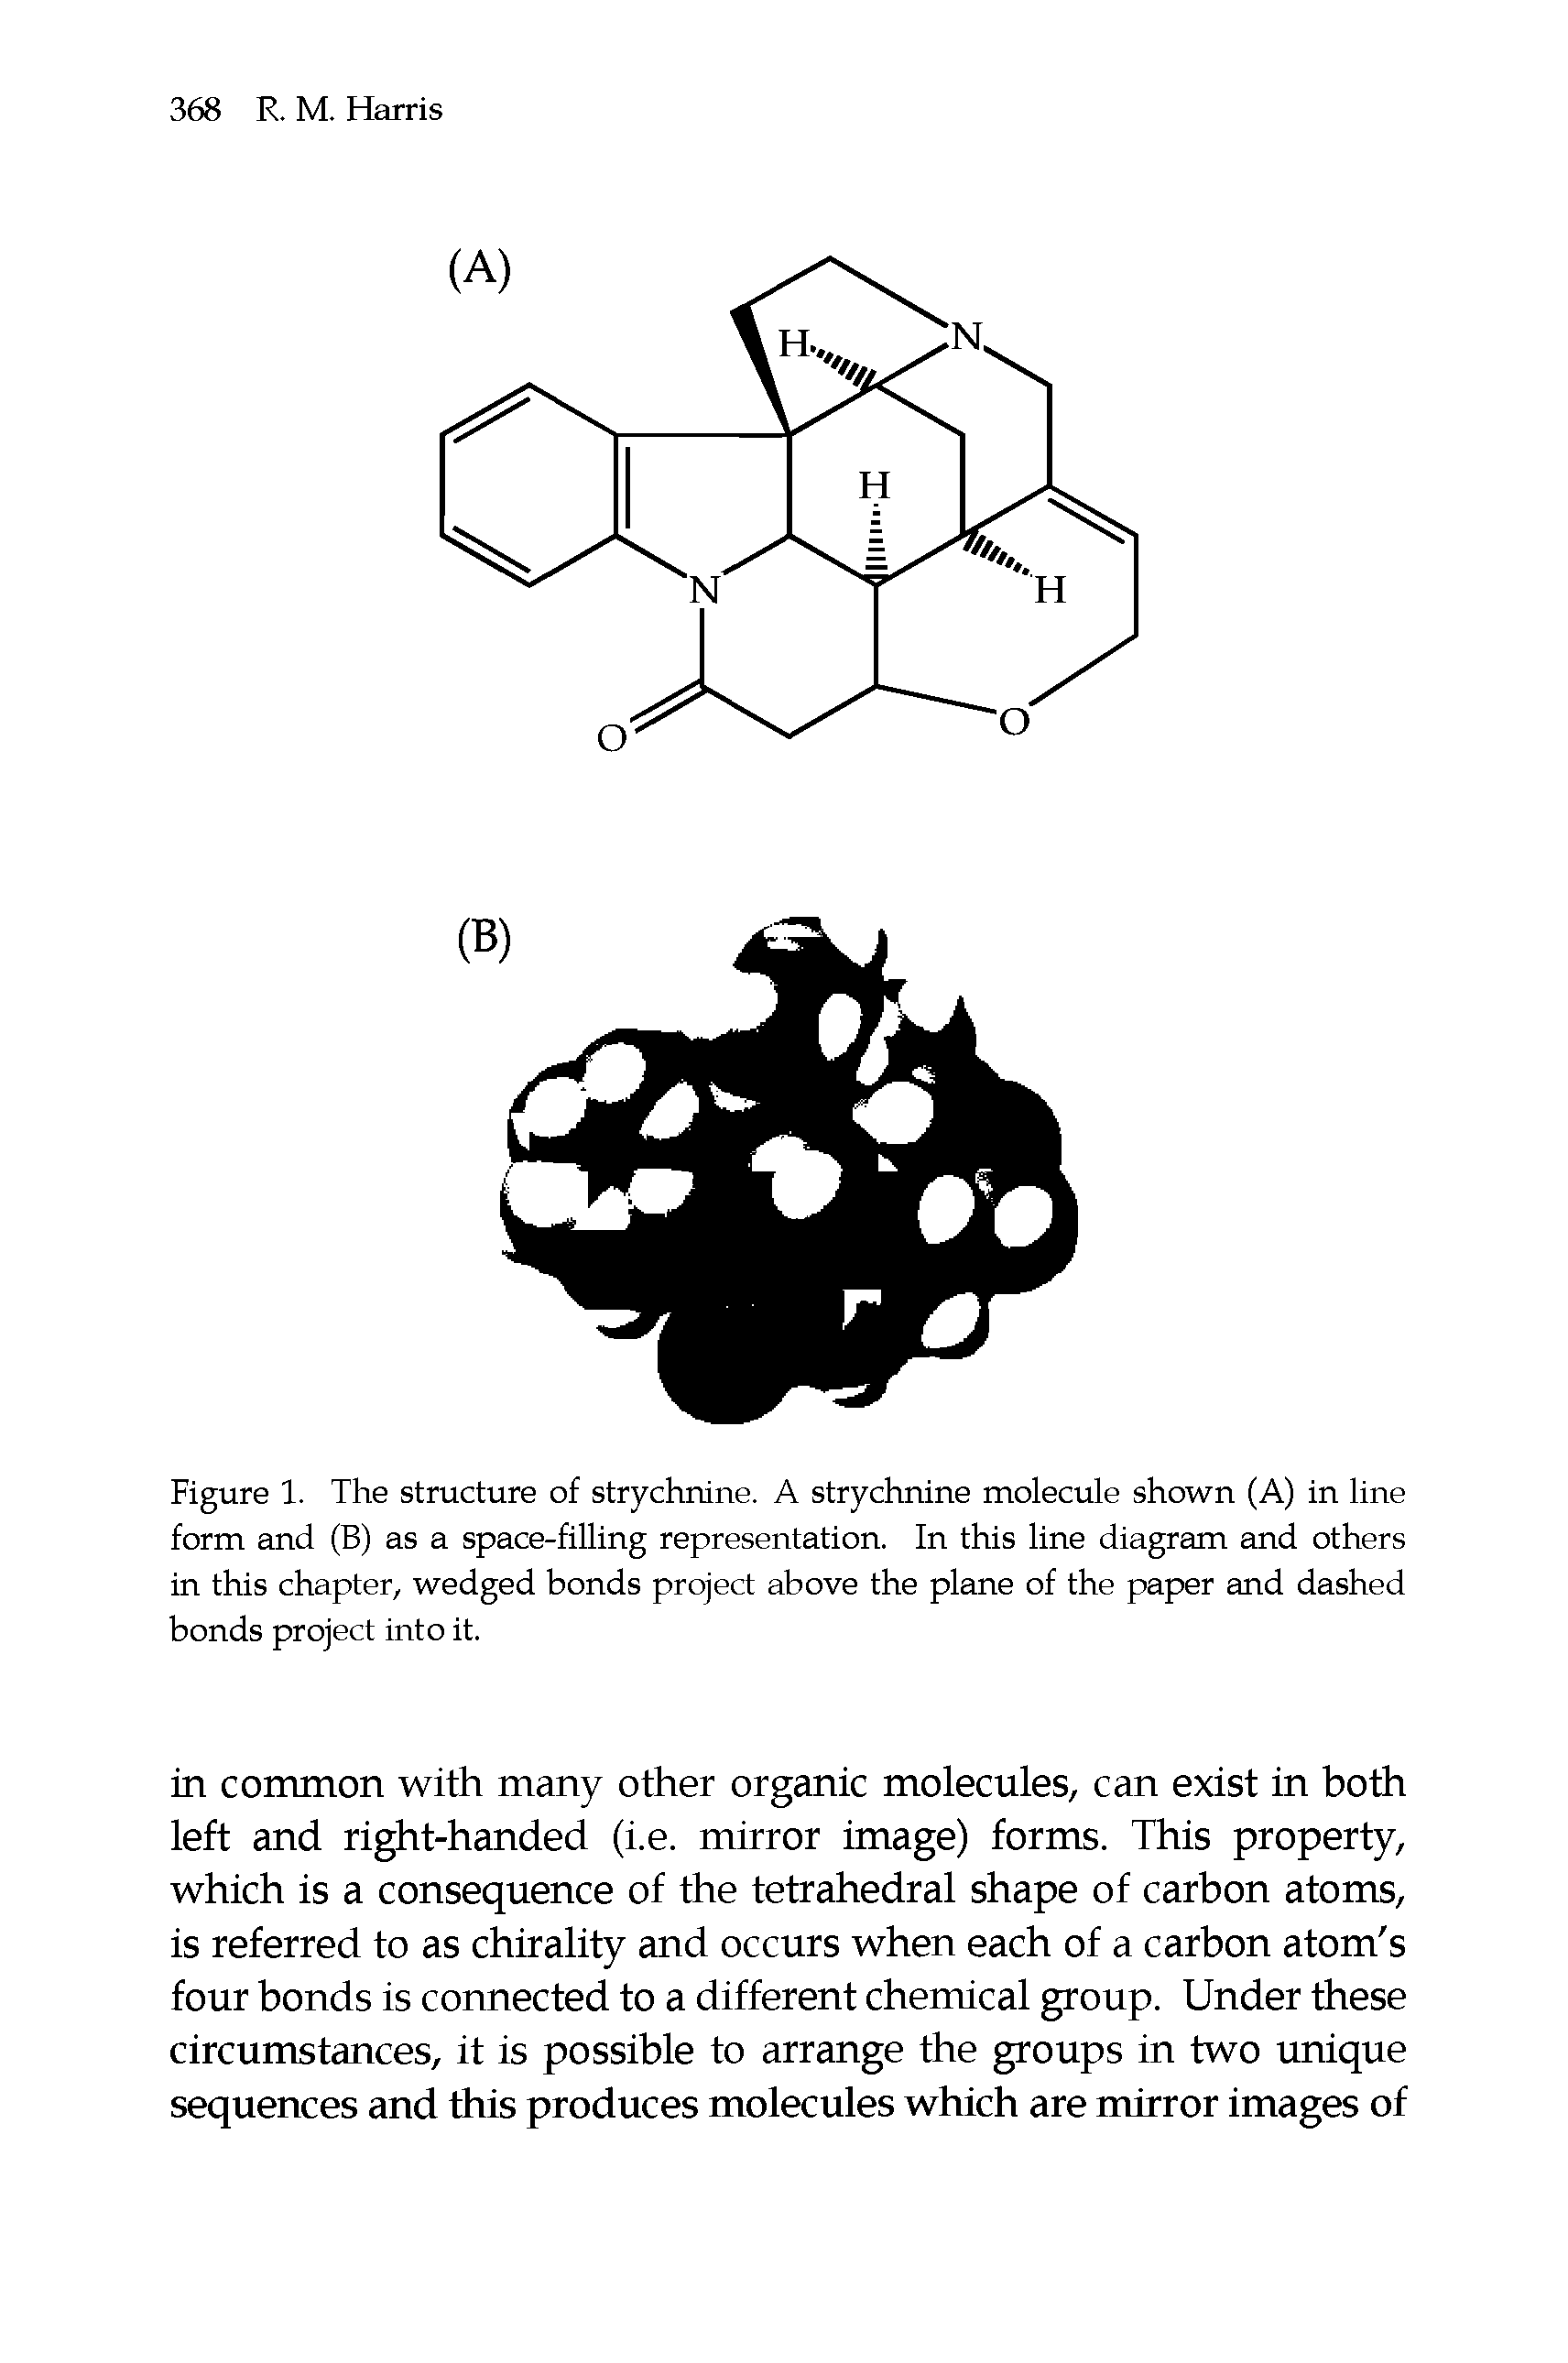 Figure 1. The structure of strychnine. A strychnine molecule shown (A) in line form and (B) as a space-filling representation. In this line diagram and others in this chapter, wedged bonds project above the plane of the paper and dashed bonds project into it.